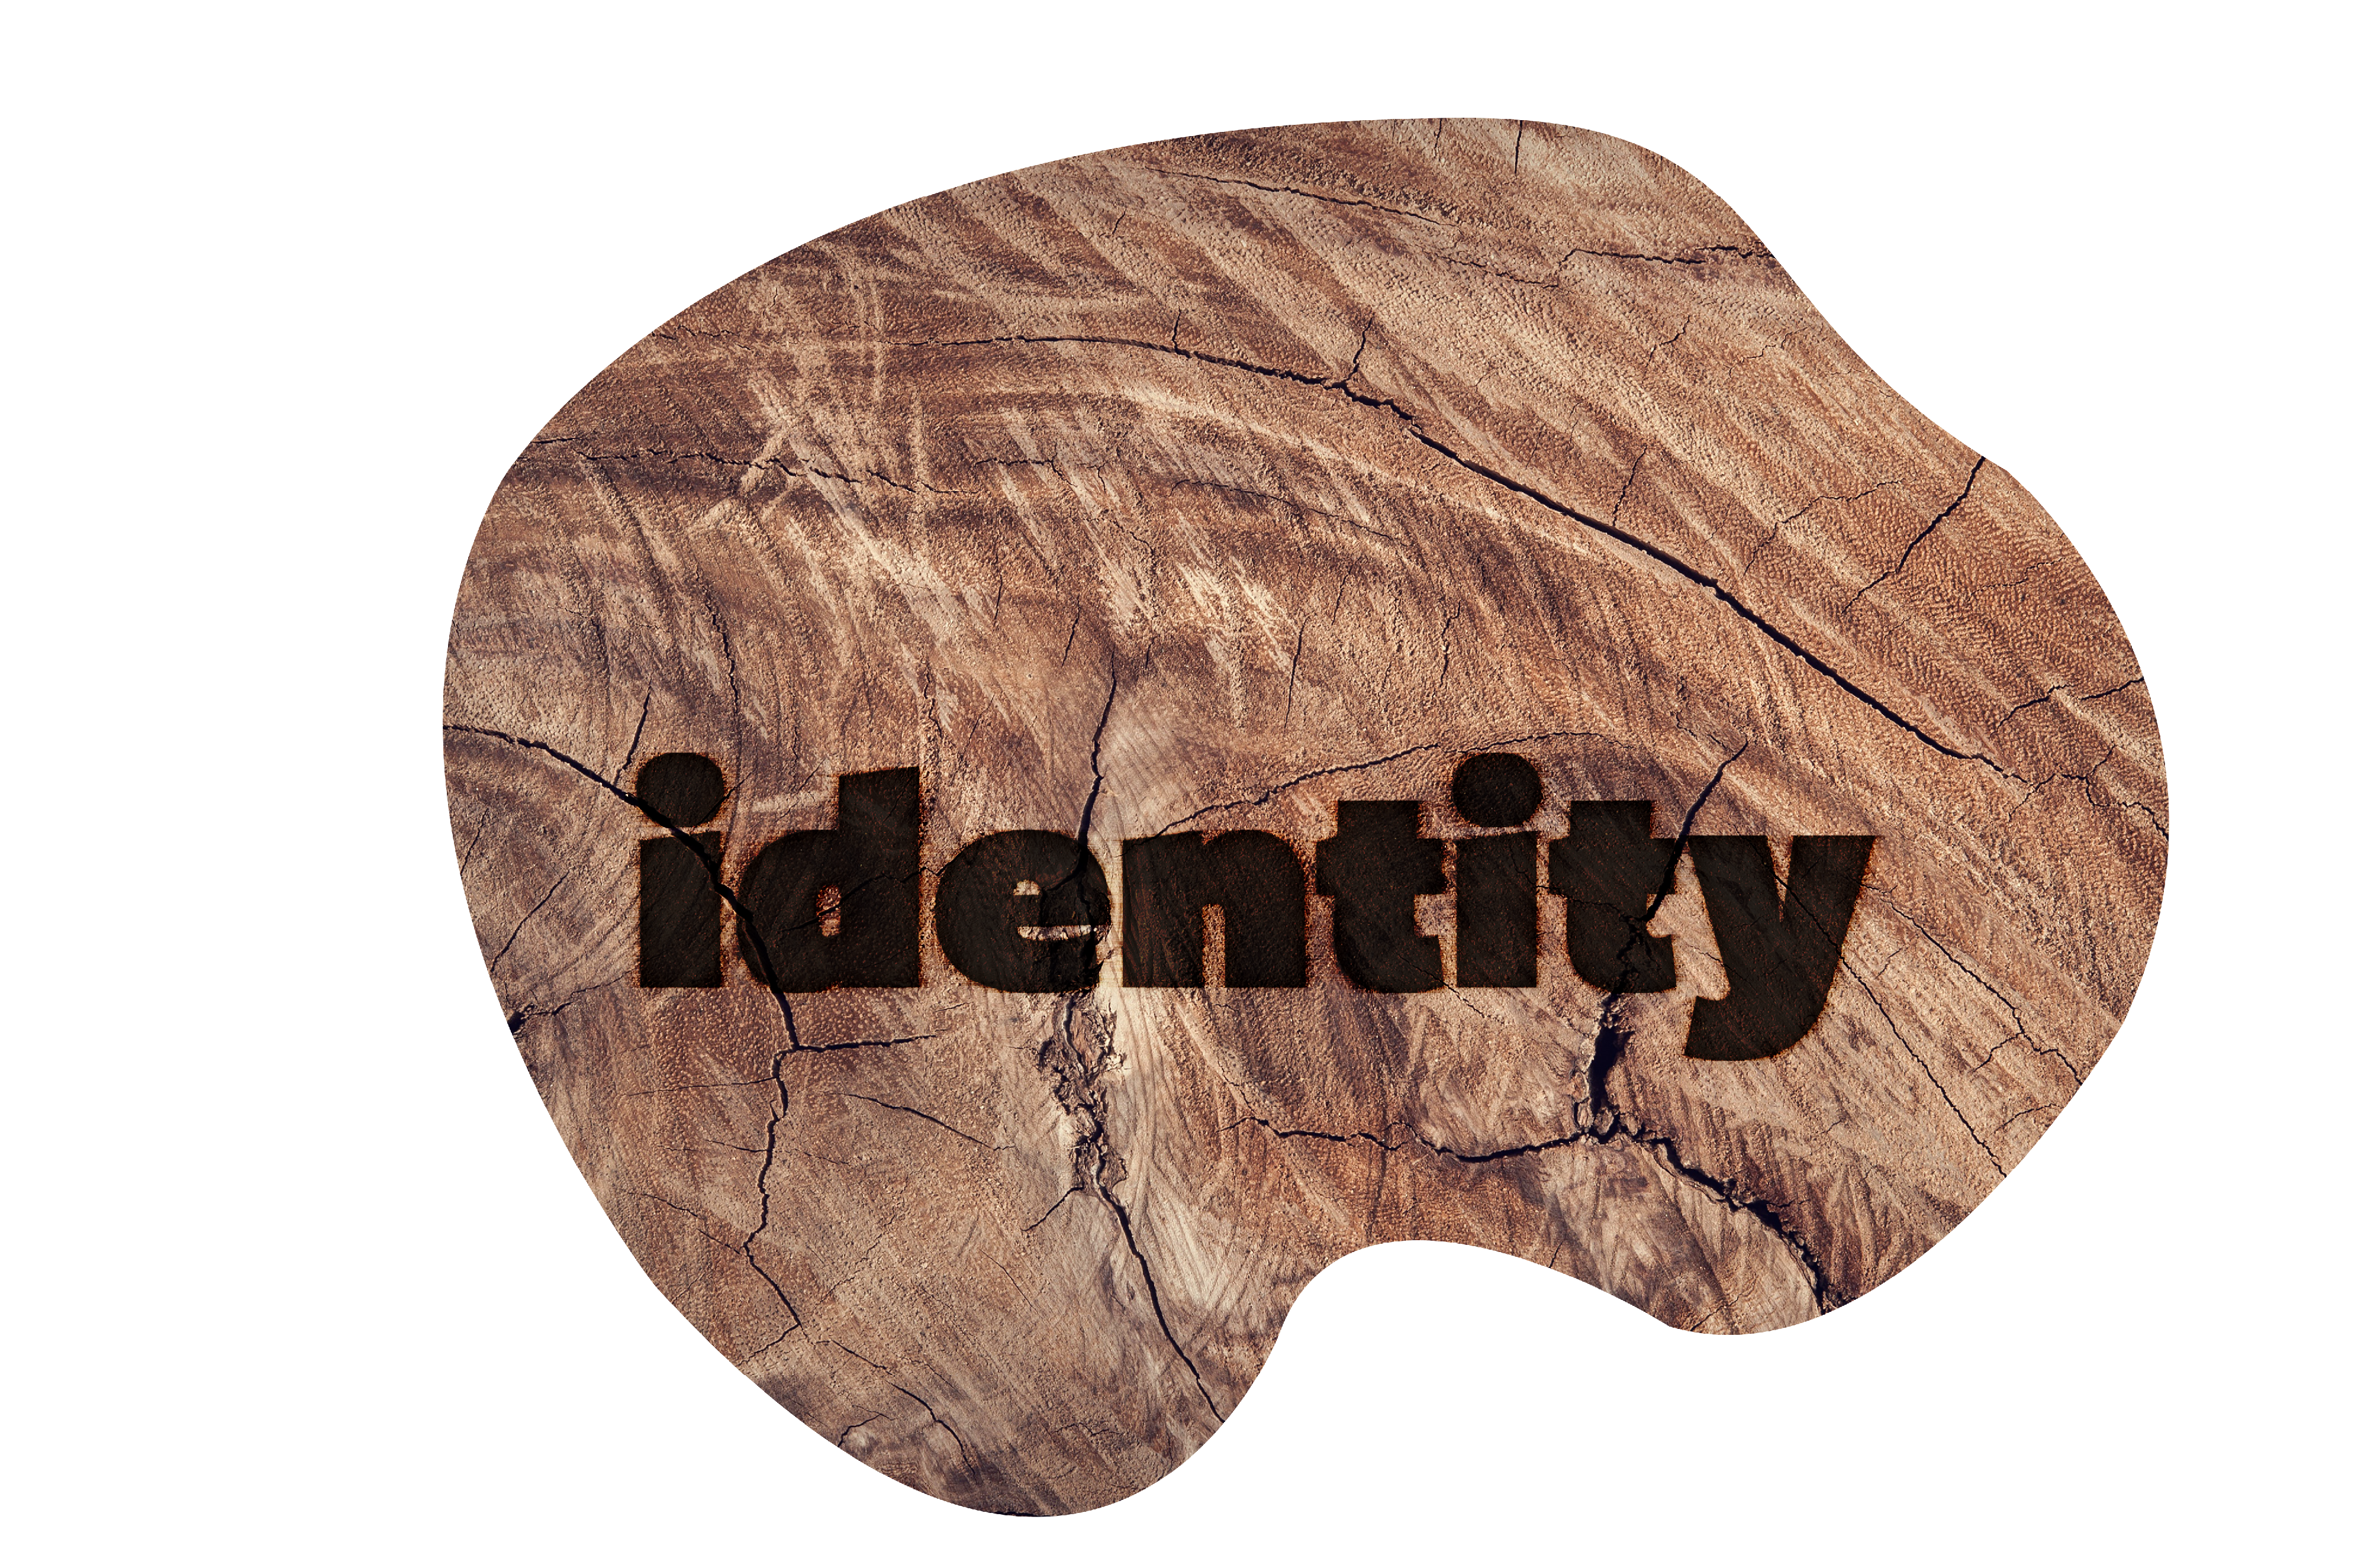 Graphical treatment of the word identity